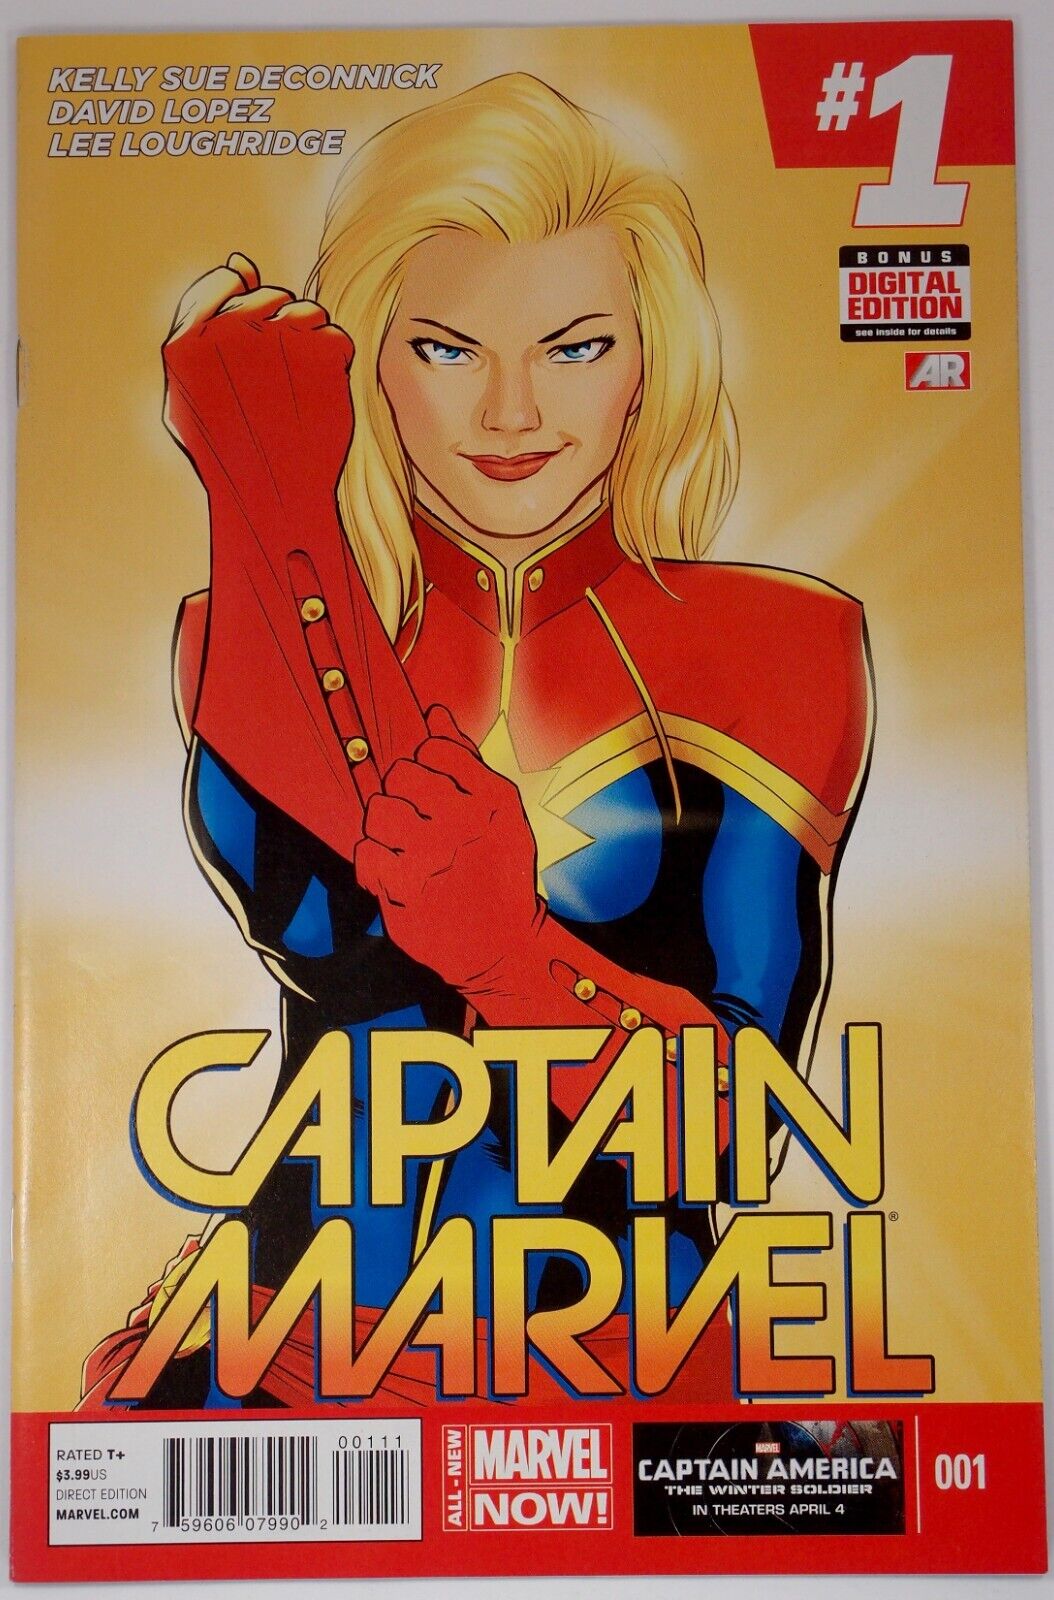 Captain Marvel #1 2014 AND Variant #1 AND #3 - #5 - Five gorgeous NM issues